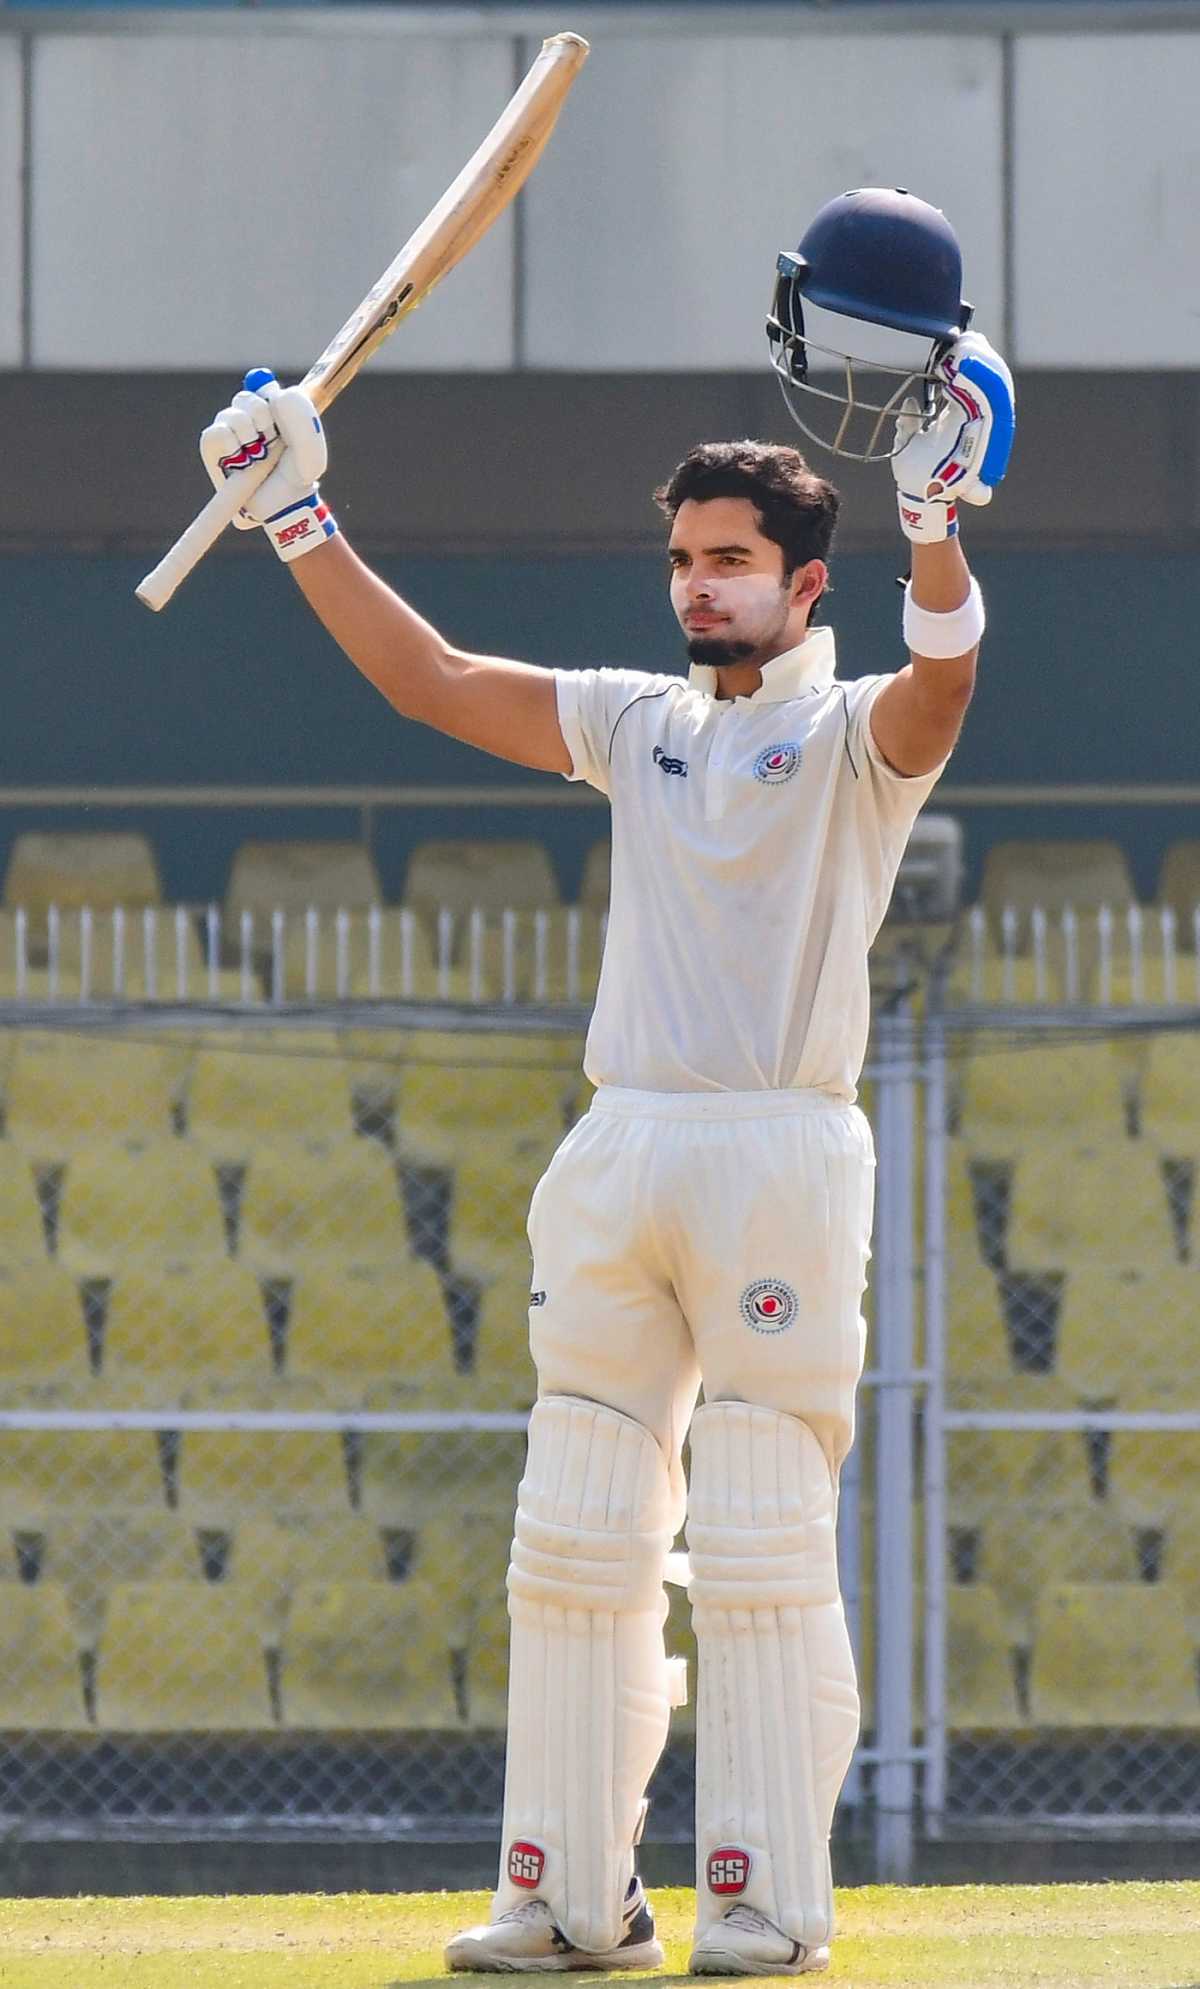 Piyush Singh's second-innings 102 wasn't enough to prevent a Bihar loss